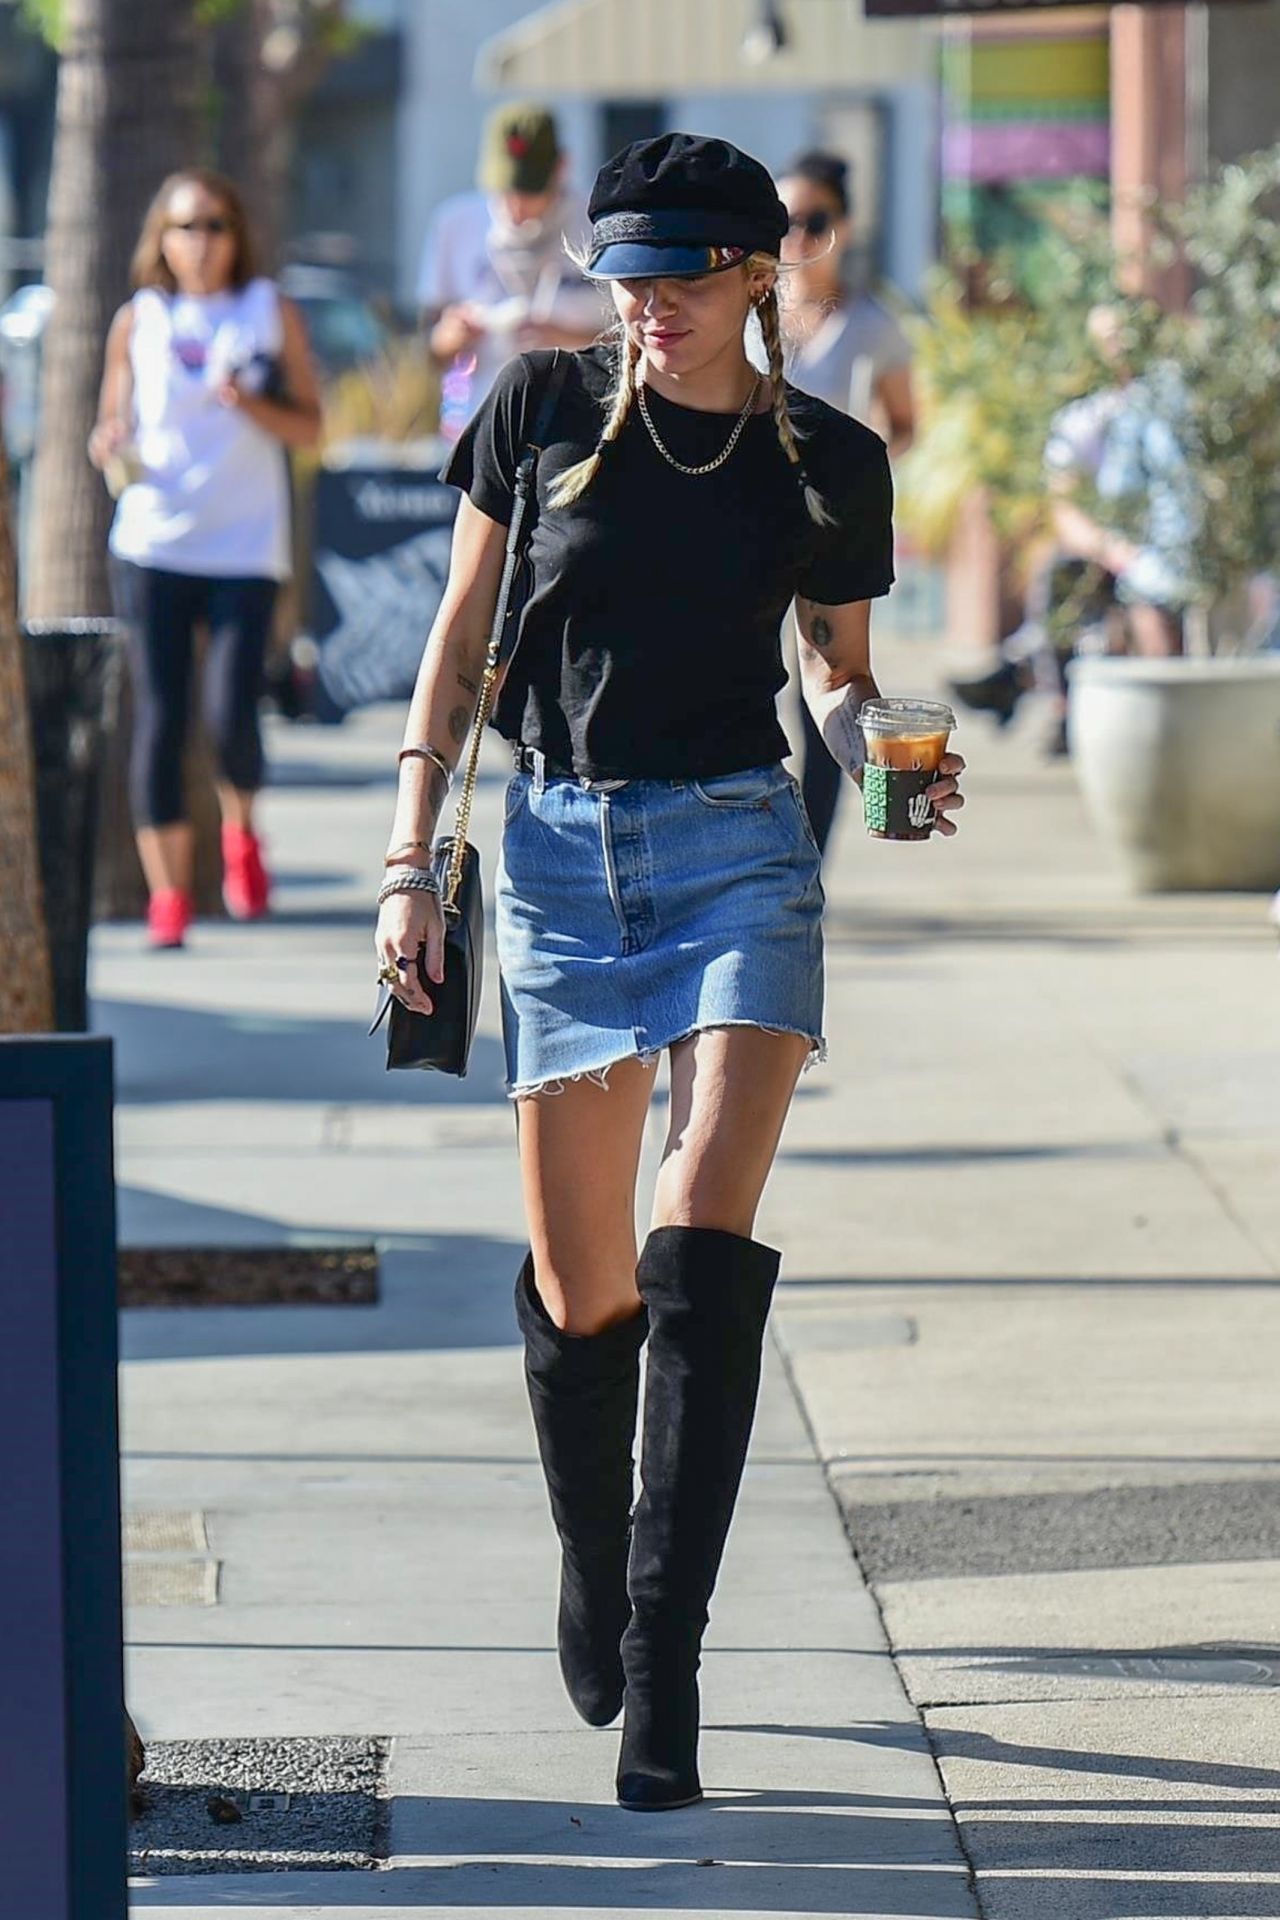 Miley Cyrus In Mini Denim Skirt And Knee High Black Boots 10 17 2019